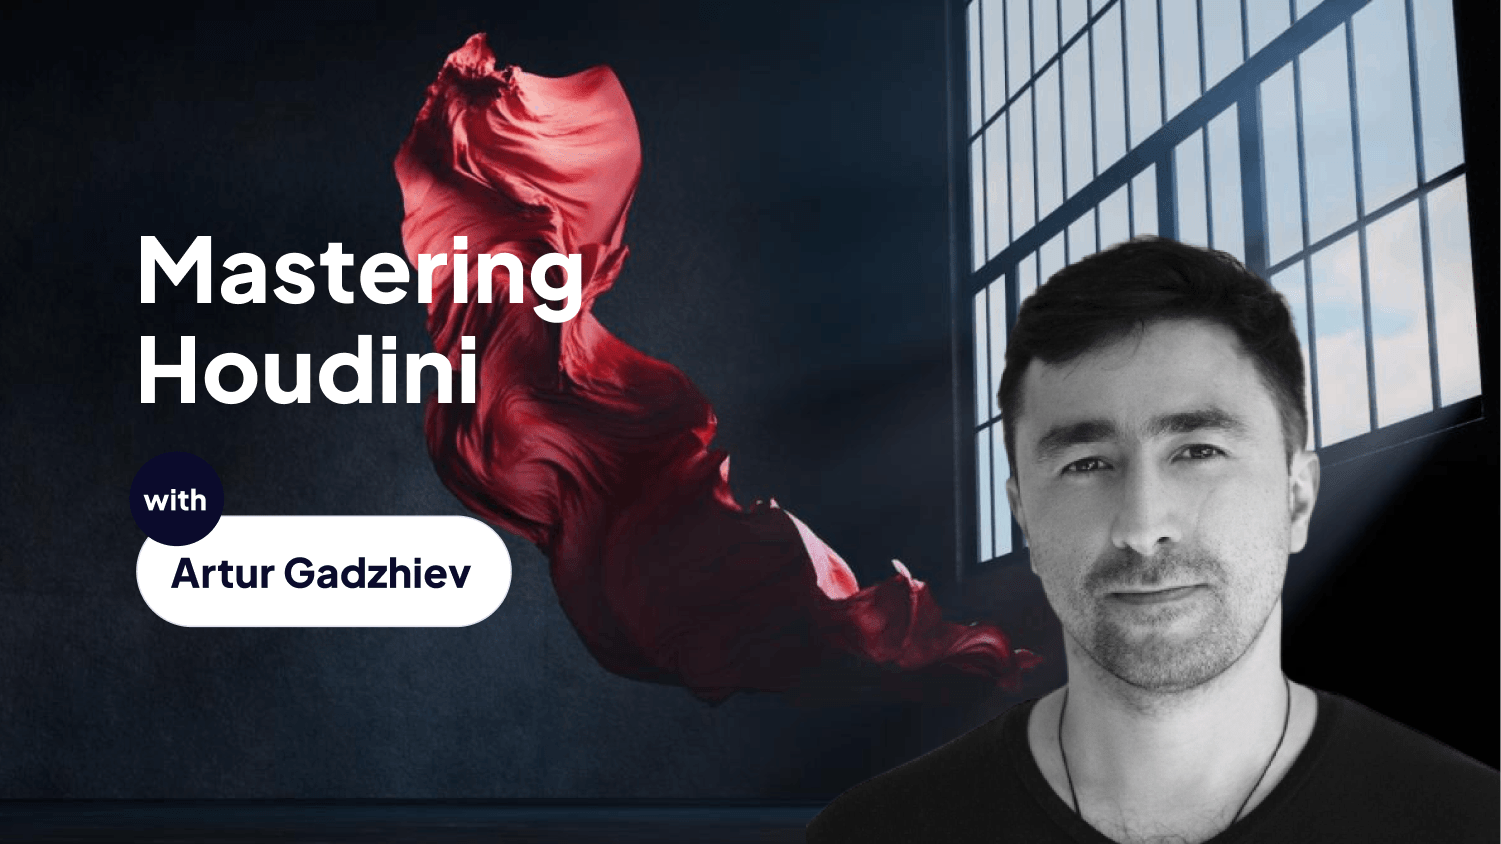 Motion Designers Academy - Mastering Houdini in Art And Design